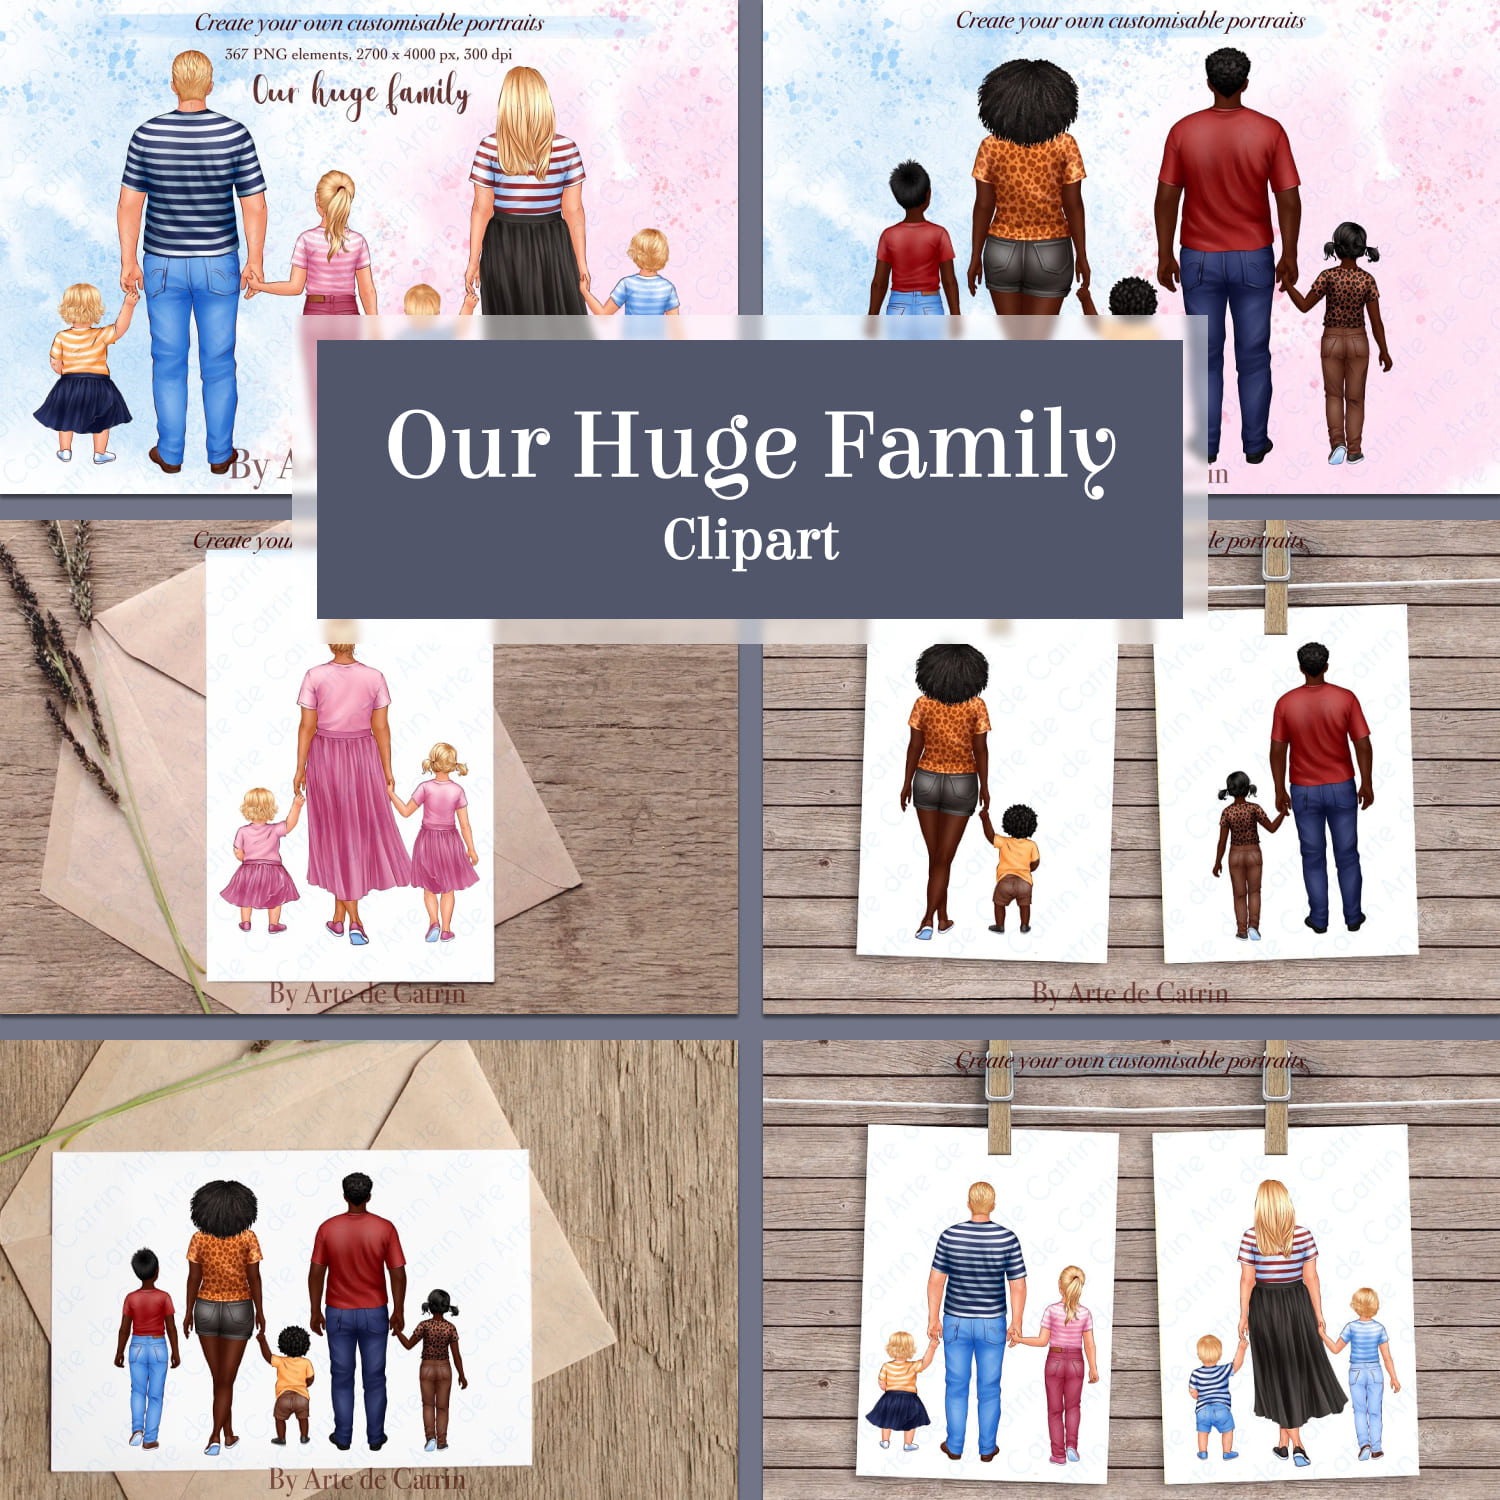 Our huge family clipart parents - main image preview.